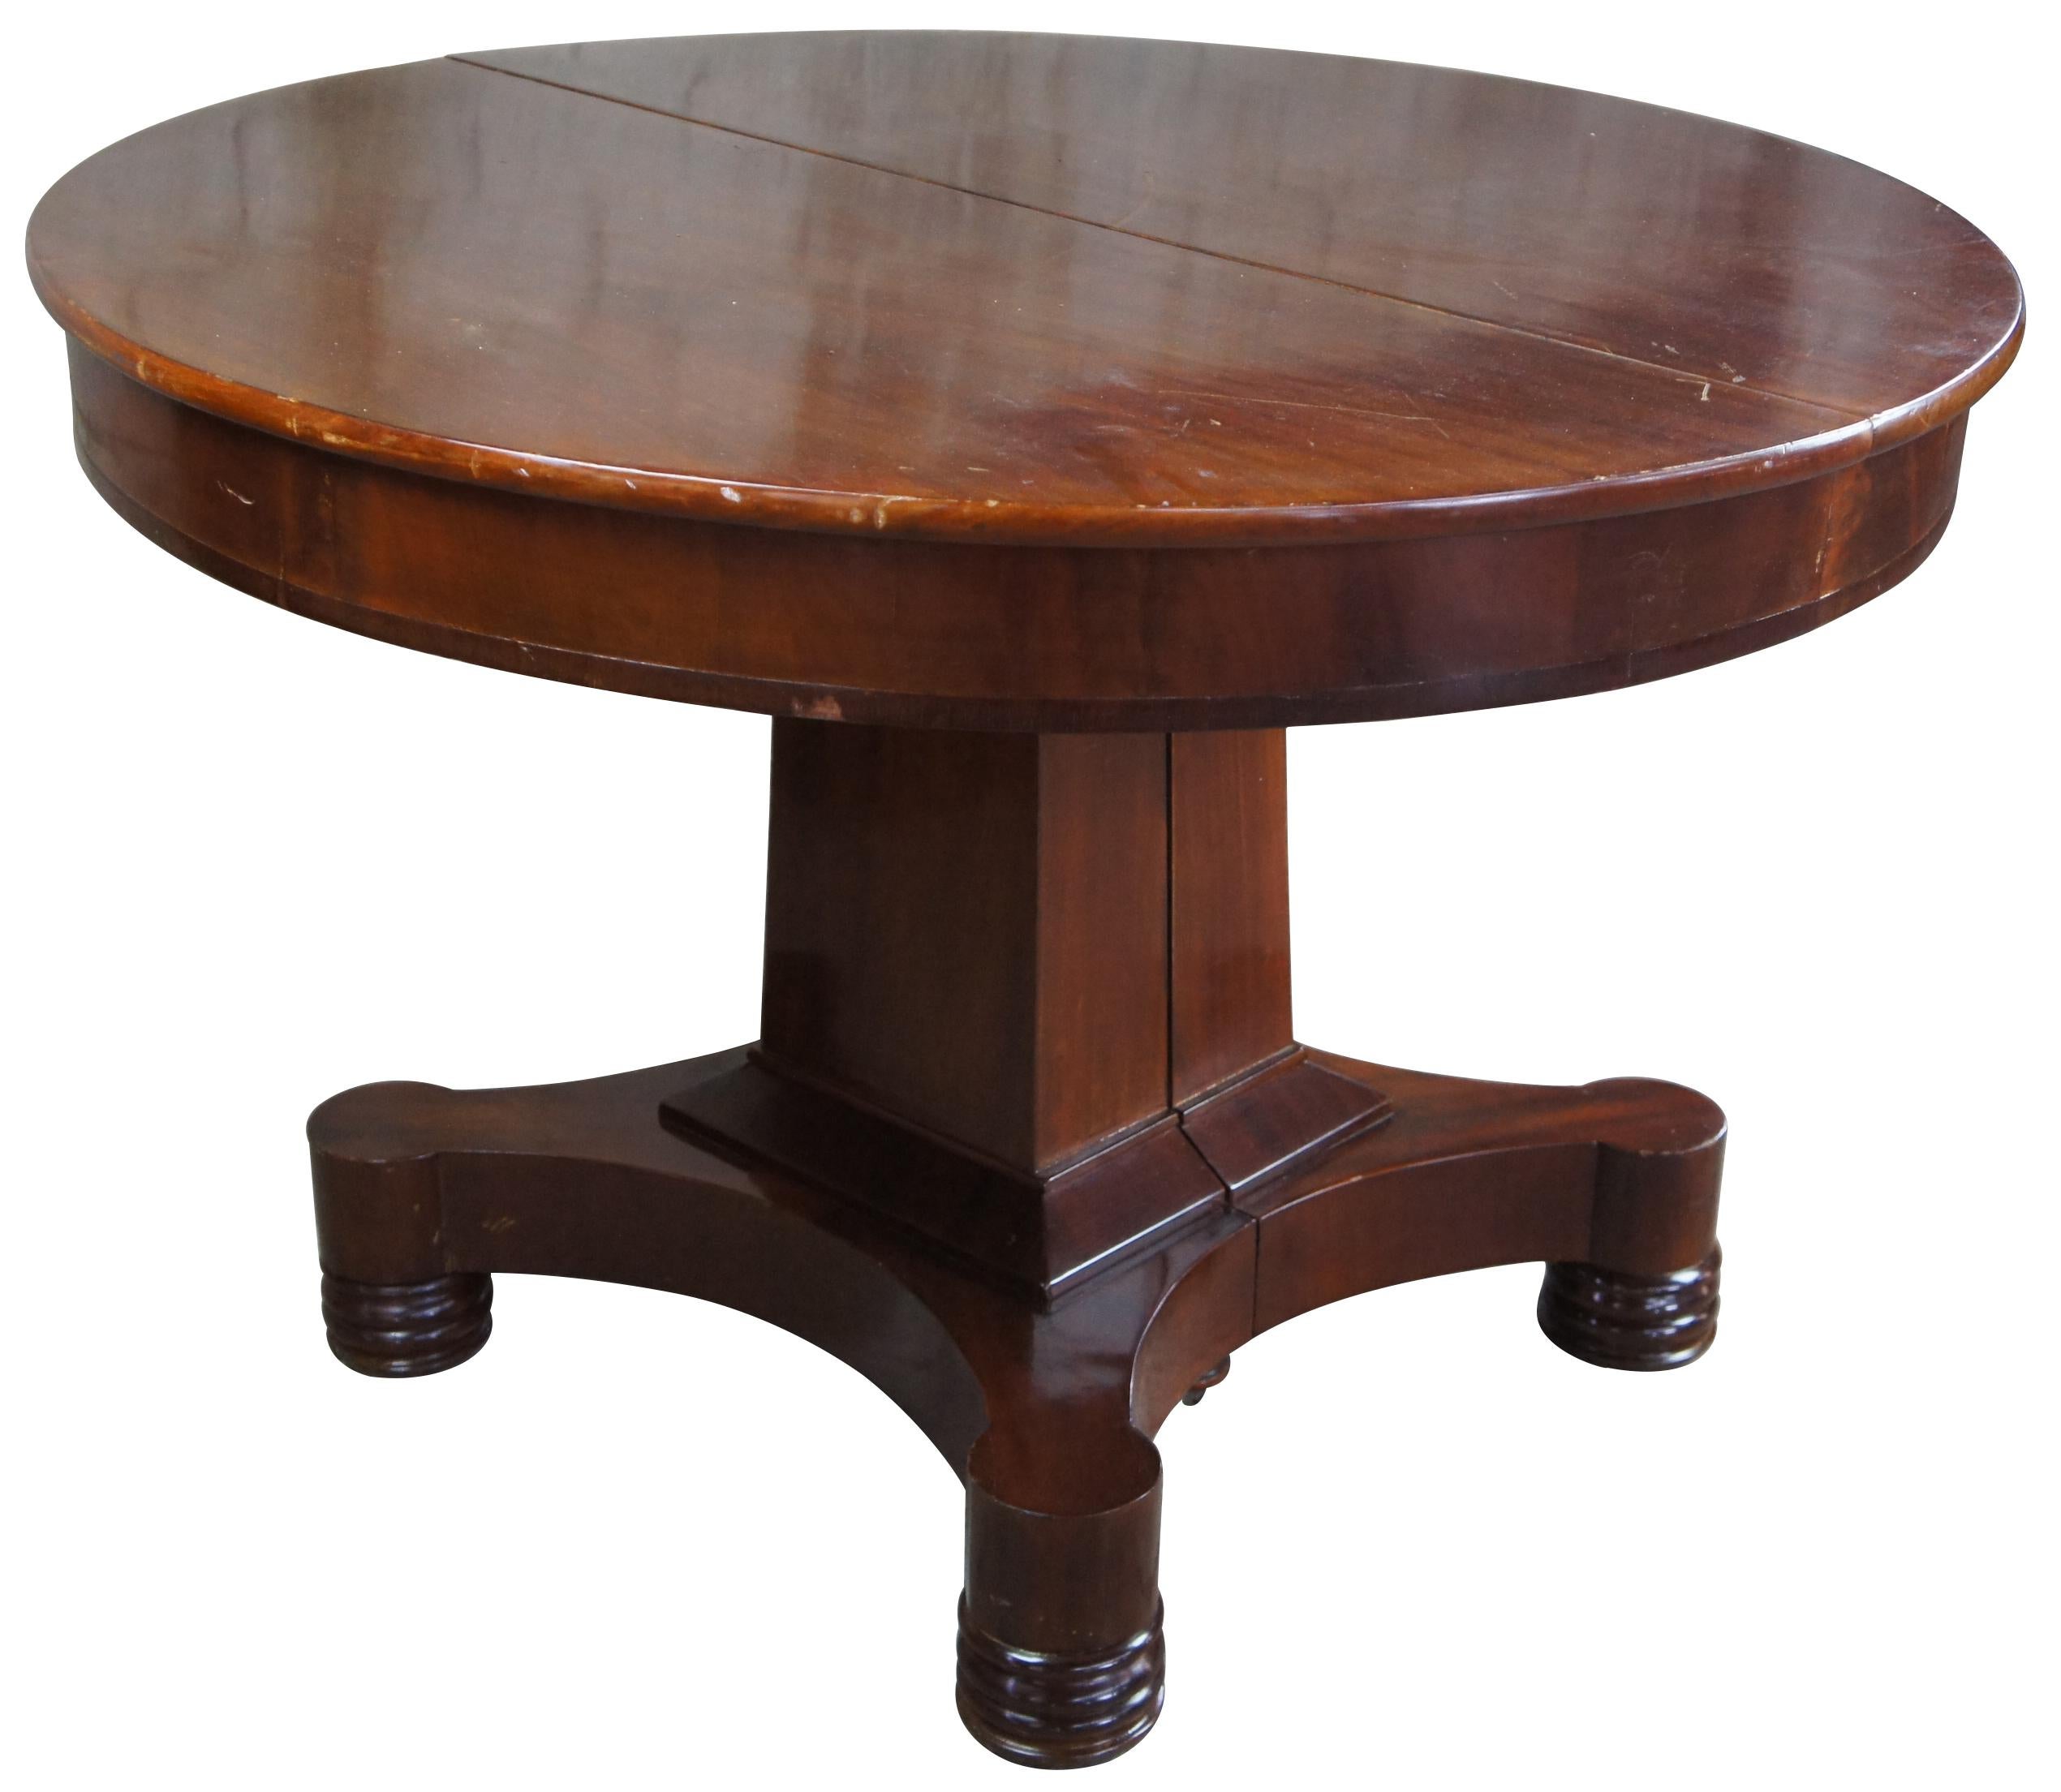 American Empire 19th century oval mahogany dining table split base extendable

Mid-19th century American Empire dining table. Made from mahogany with split base, extendable with two leaves.